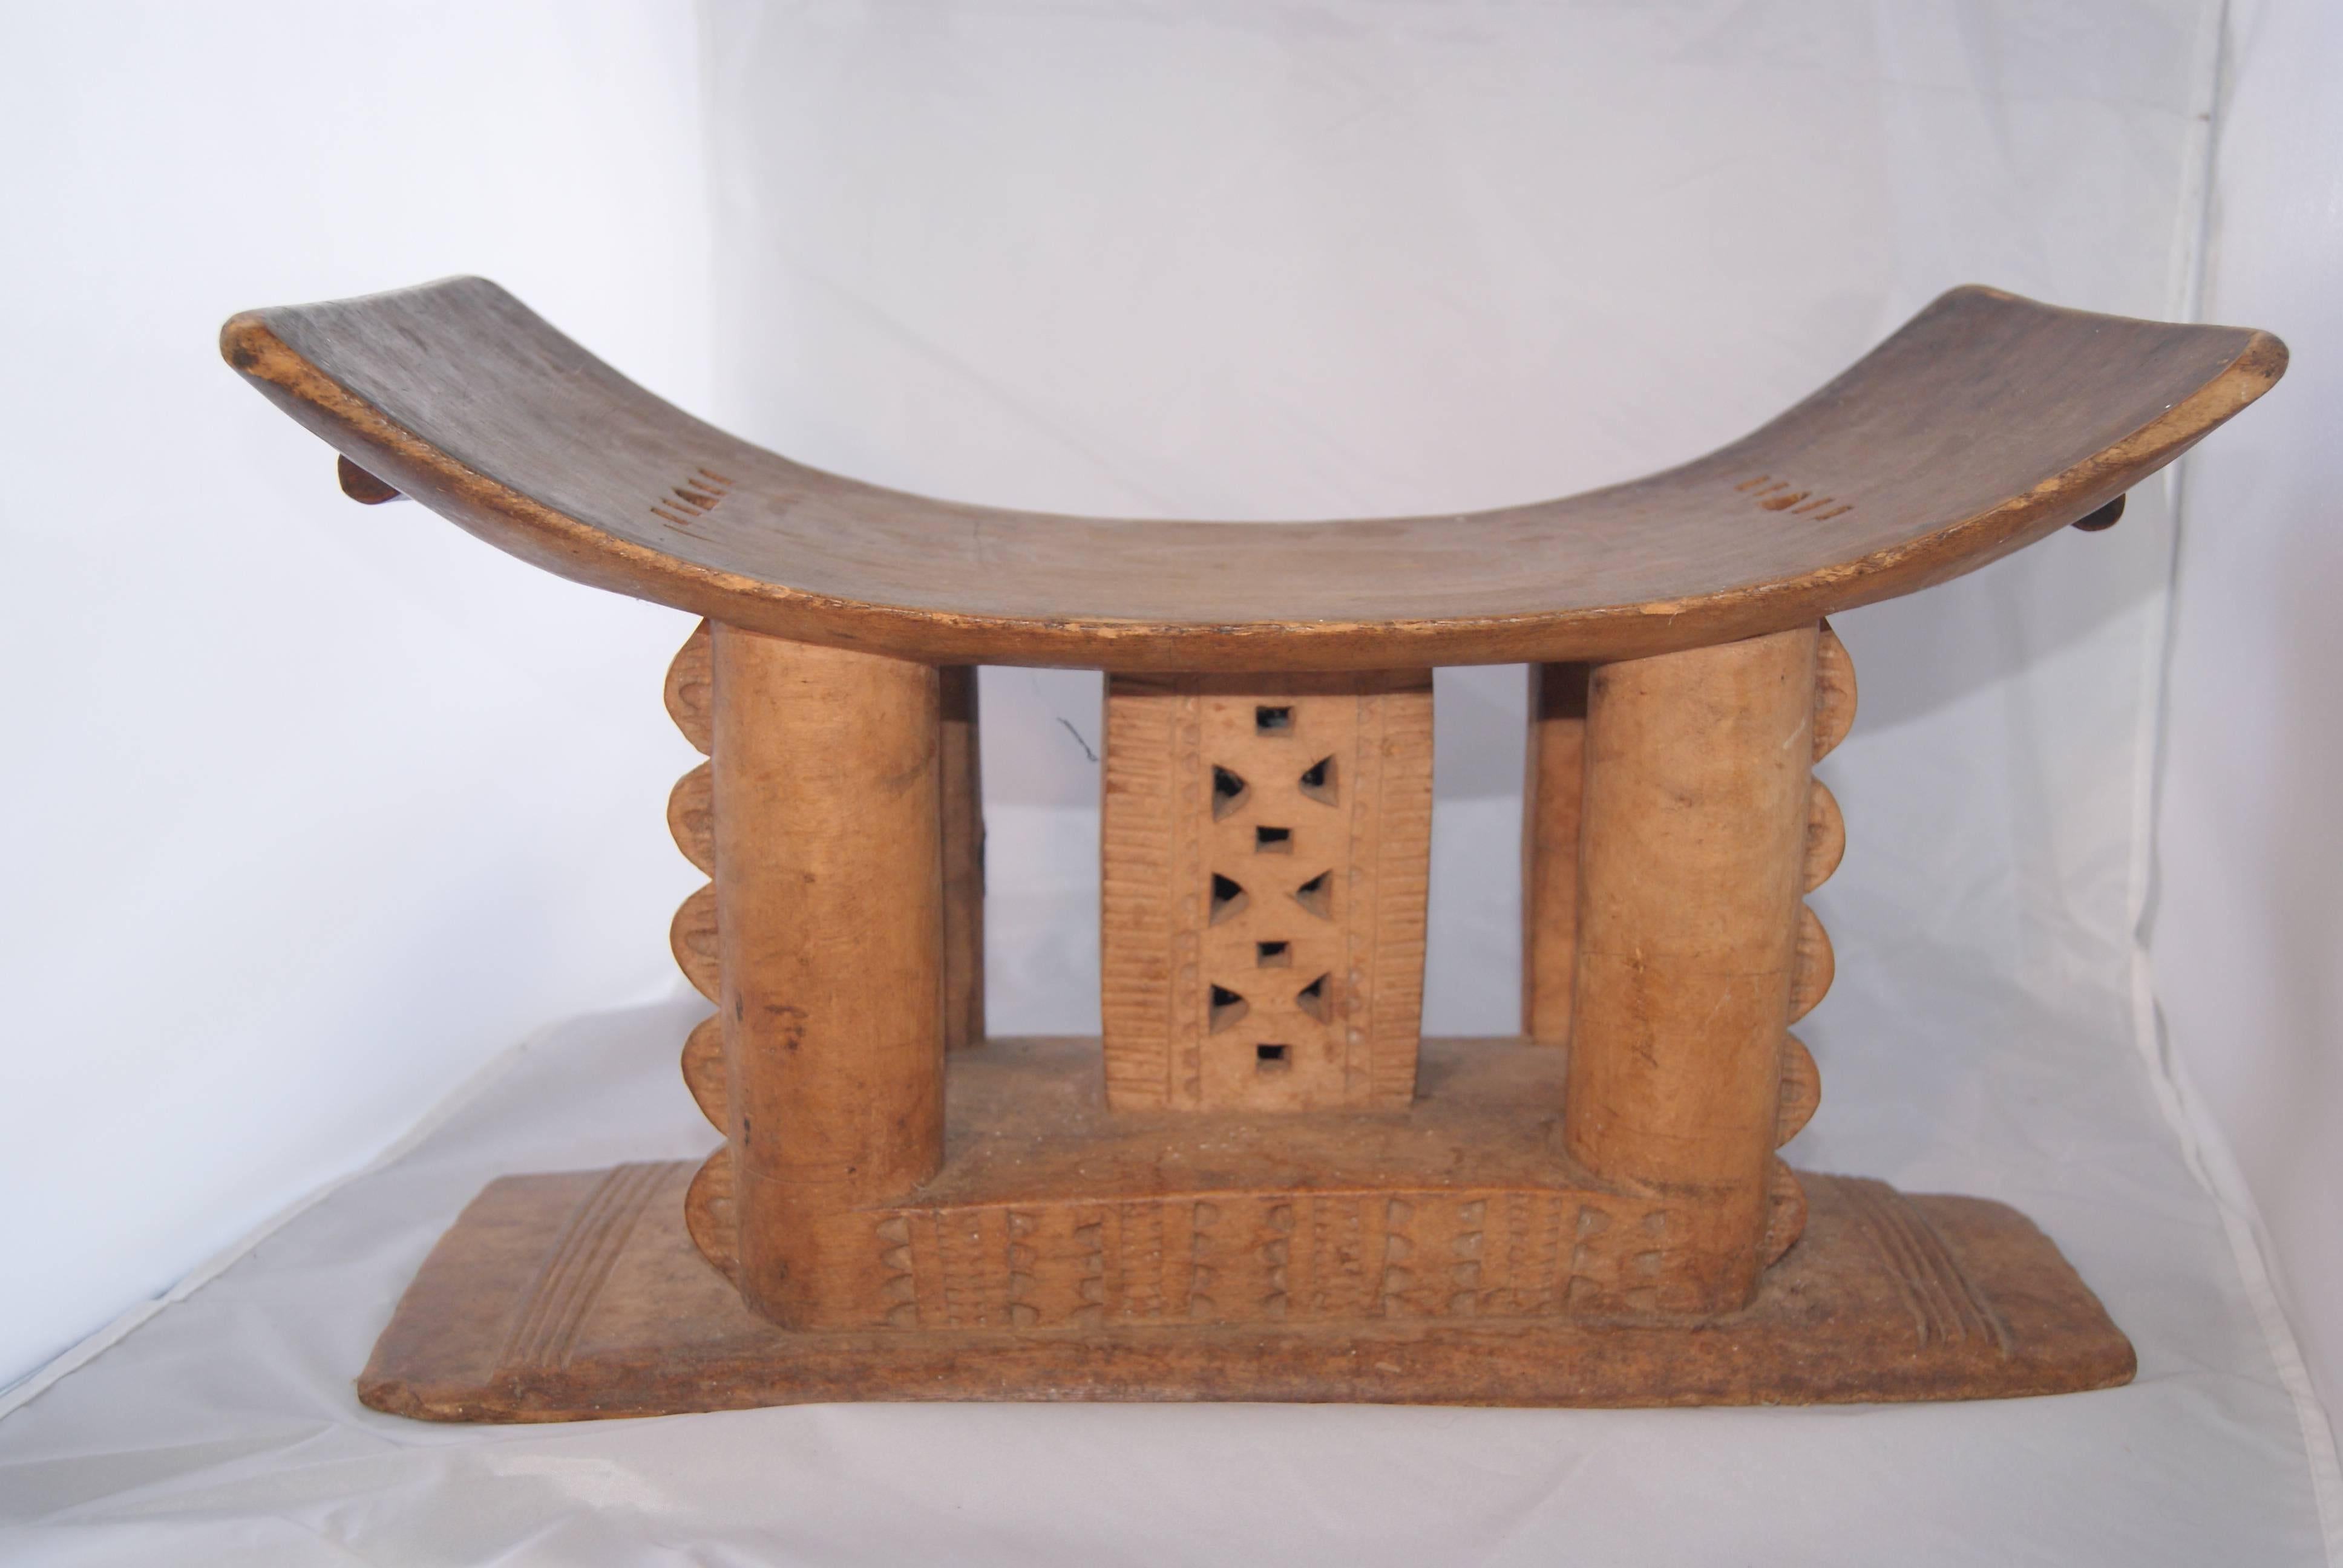 Unknown Still-Life Sculpture - Early 20th century Ashanti African Stool